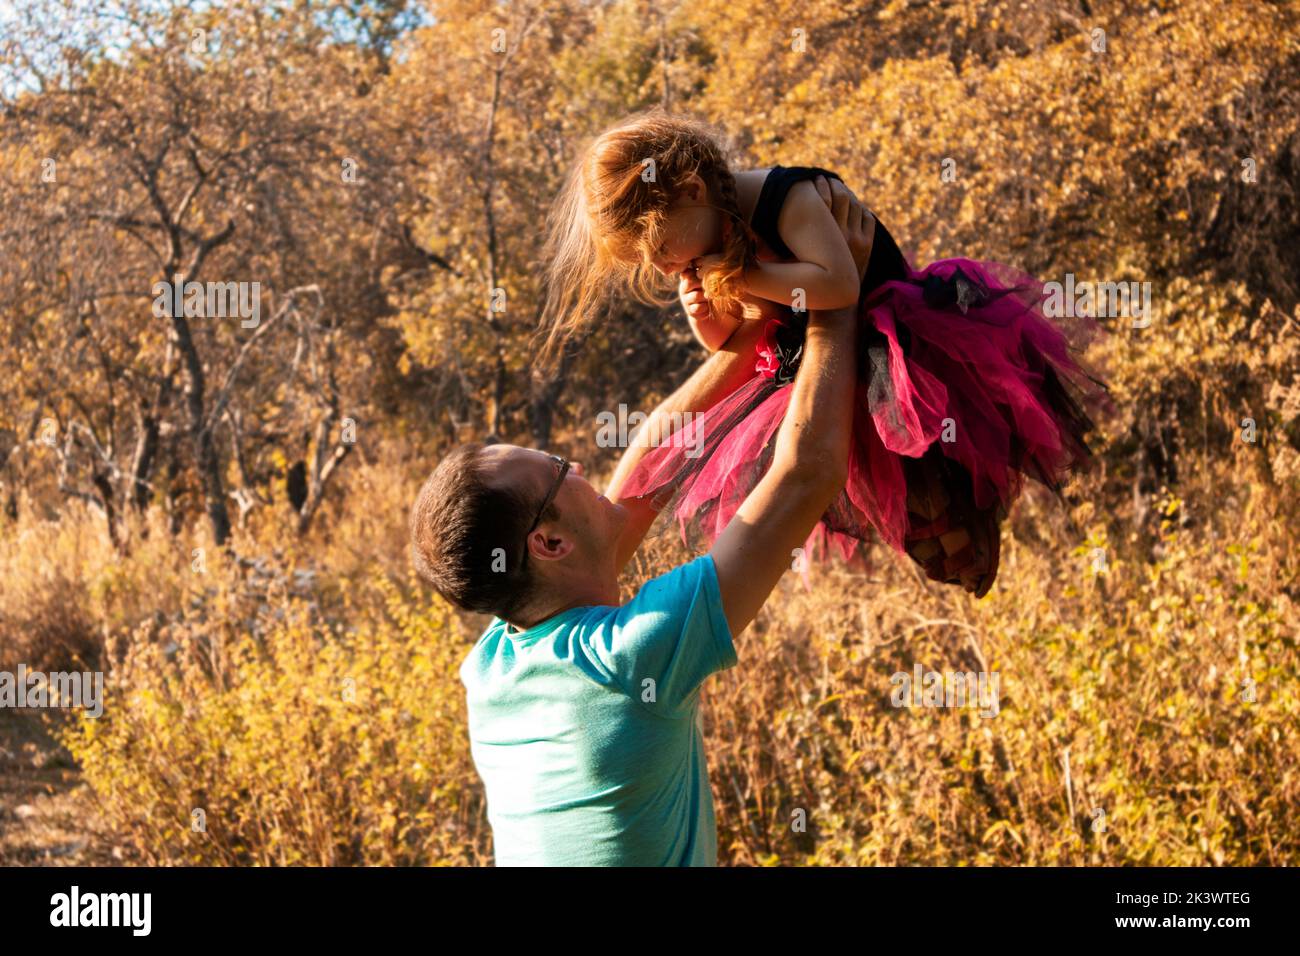 dad and daughter are dancing in nature.a little ballerina dances with her dad. little princess.dad holds his daughter in his arms. dance support Stock Photo